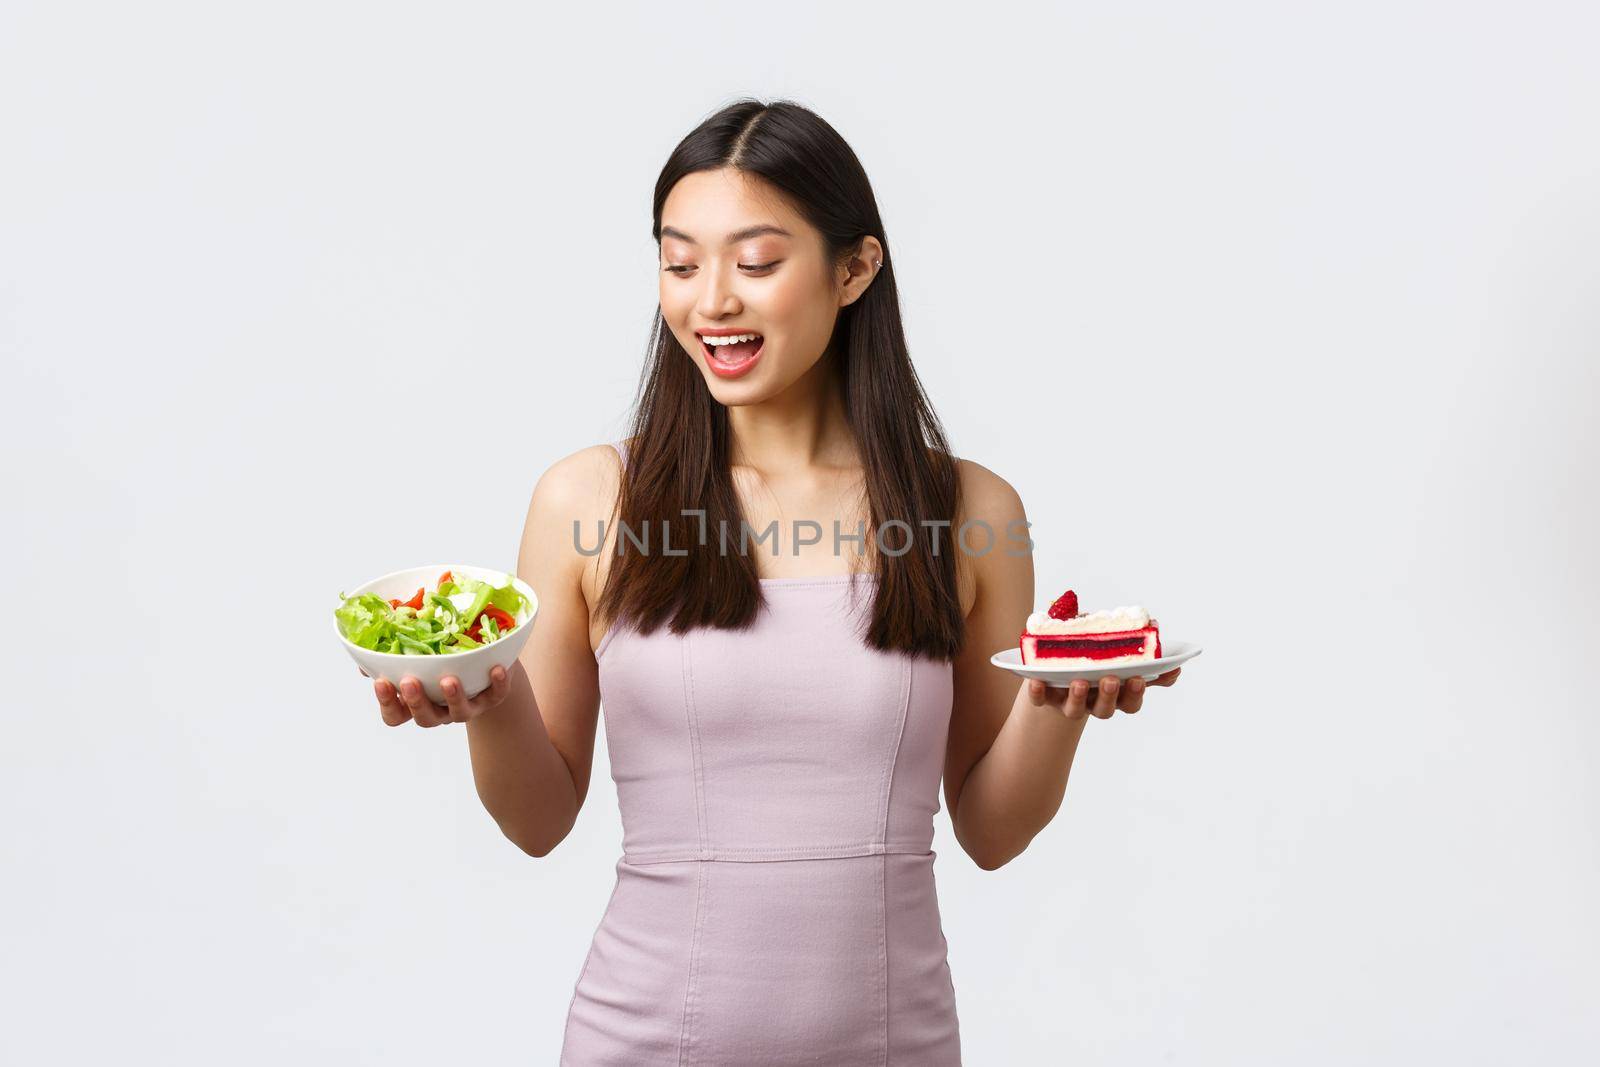 Healthy lifestyle, leisure and food concept. Cheerful beautiful asian girl in dress, looking excited with happy smile at salad instead of sweet cake, standing white background.